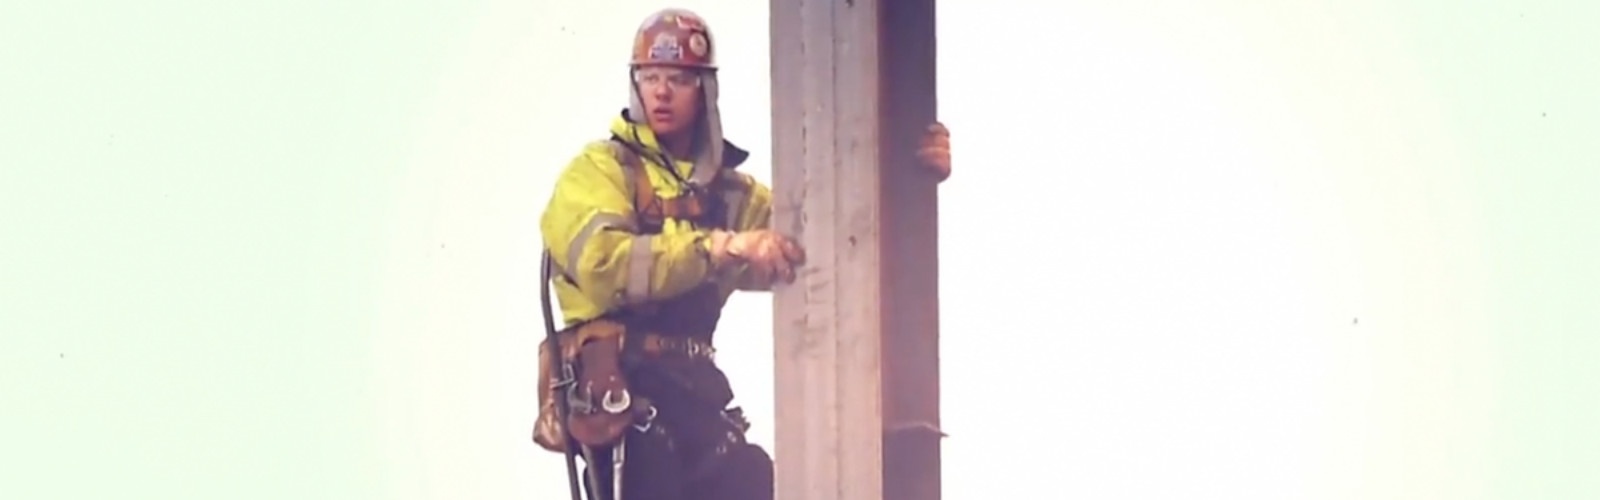 4 Short Lessons On Fall Safety When Working At Heights